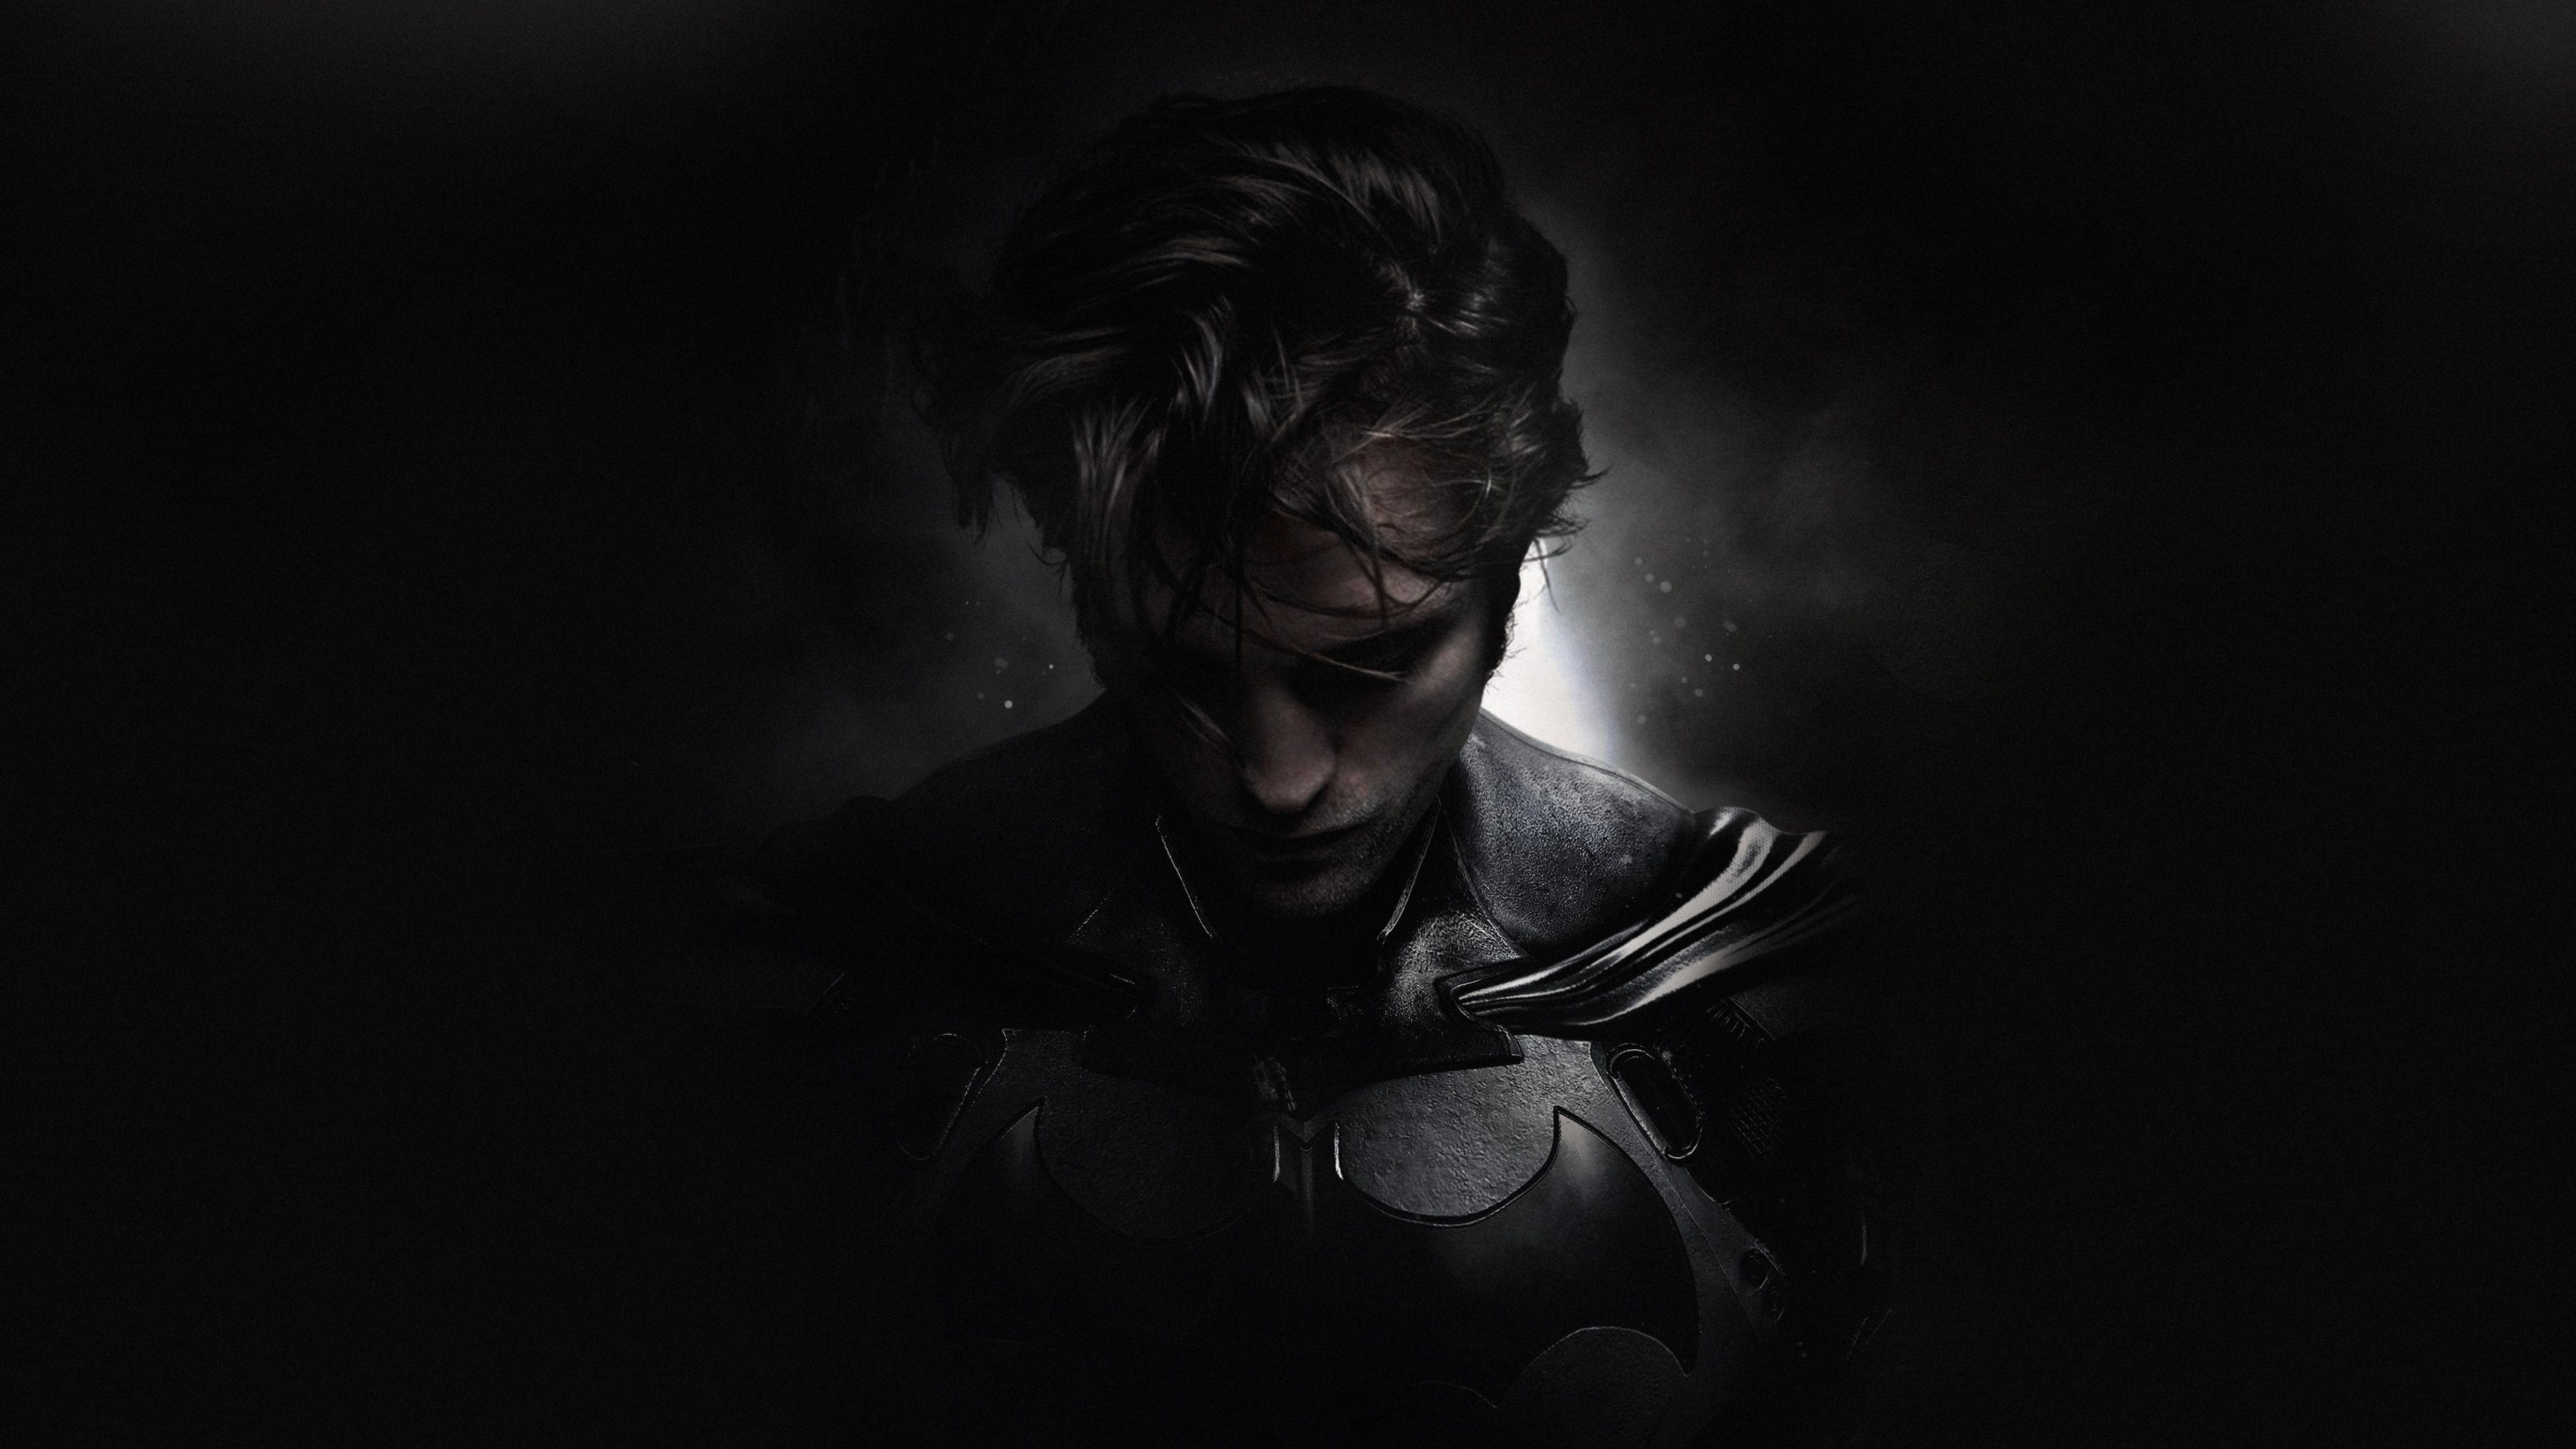 2560x1080 The Batman Robert Pattinson 2021 Poster 2560x1080 Resolution Wallpaper, HD Movies 4K Wallpapers, Image, Photos and Backgrounds